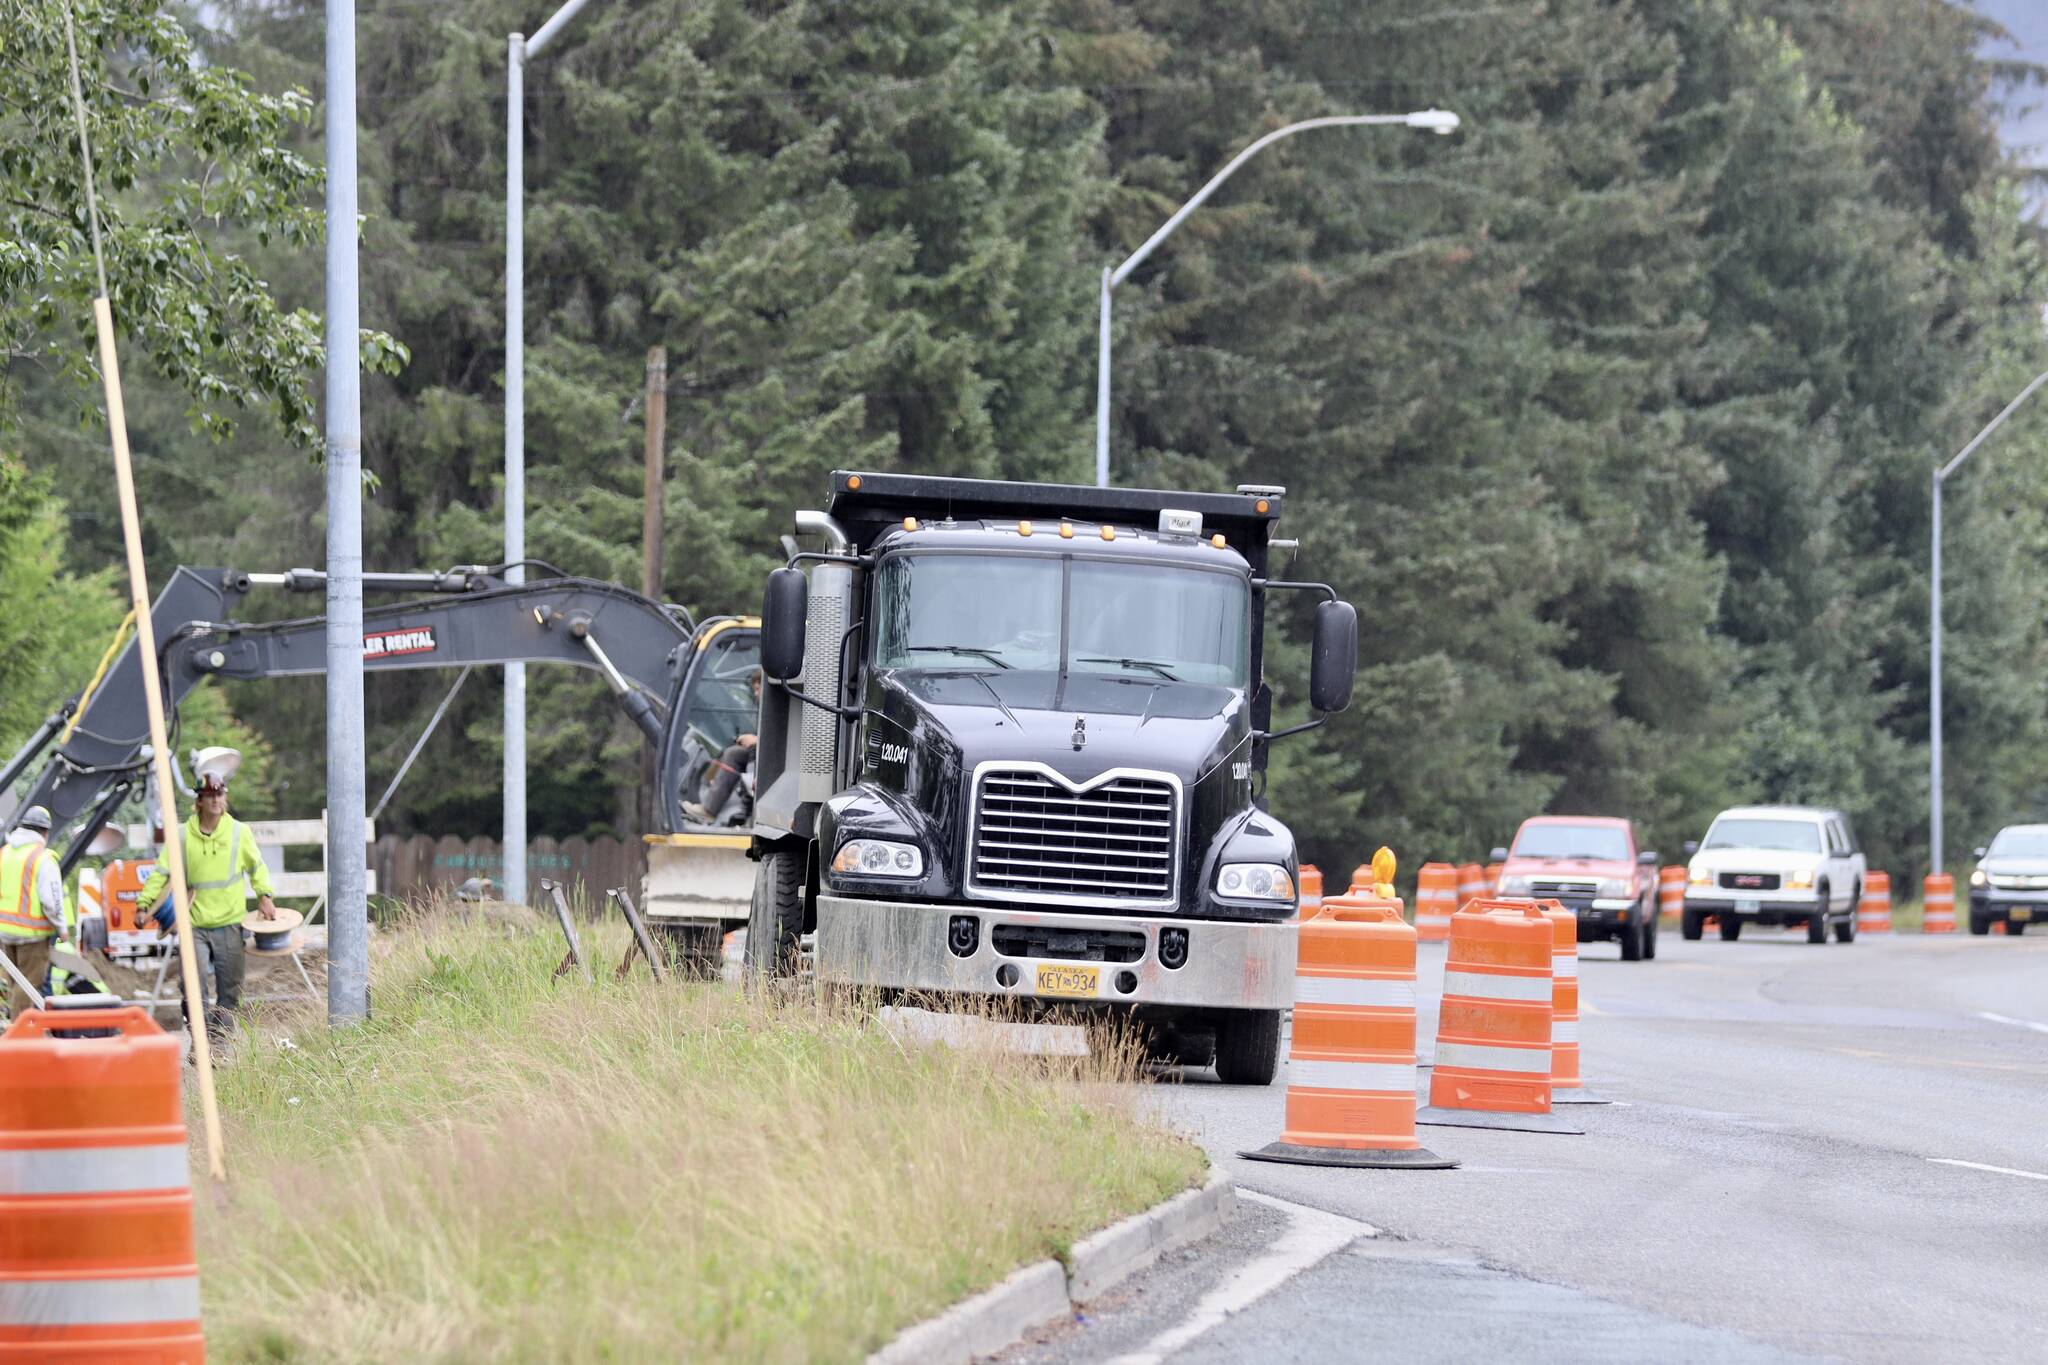 Work on culvert under Mendenhall Loop Road went faster than expected, said a Department of Transportation and Public Facilities spokesperson. (Michael S. Lockett / Juneau Empire)